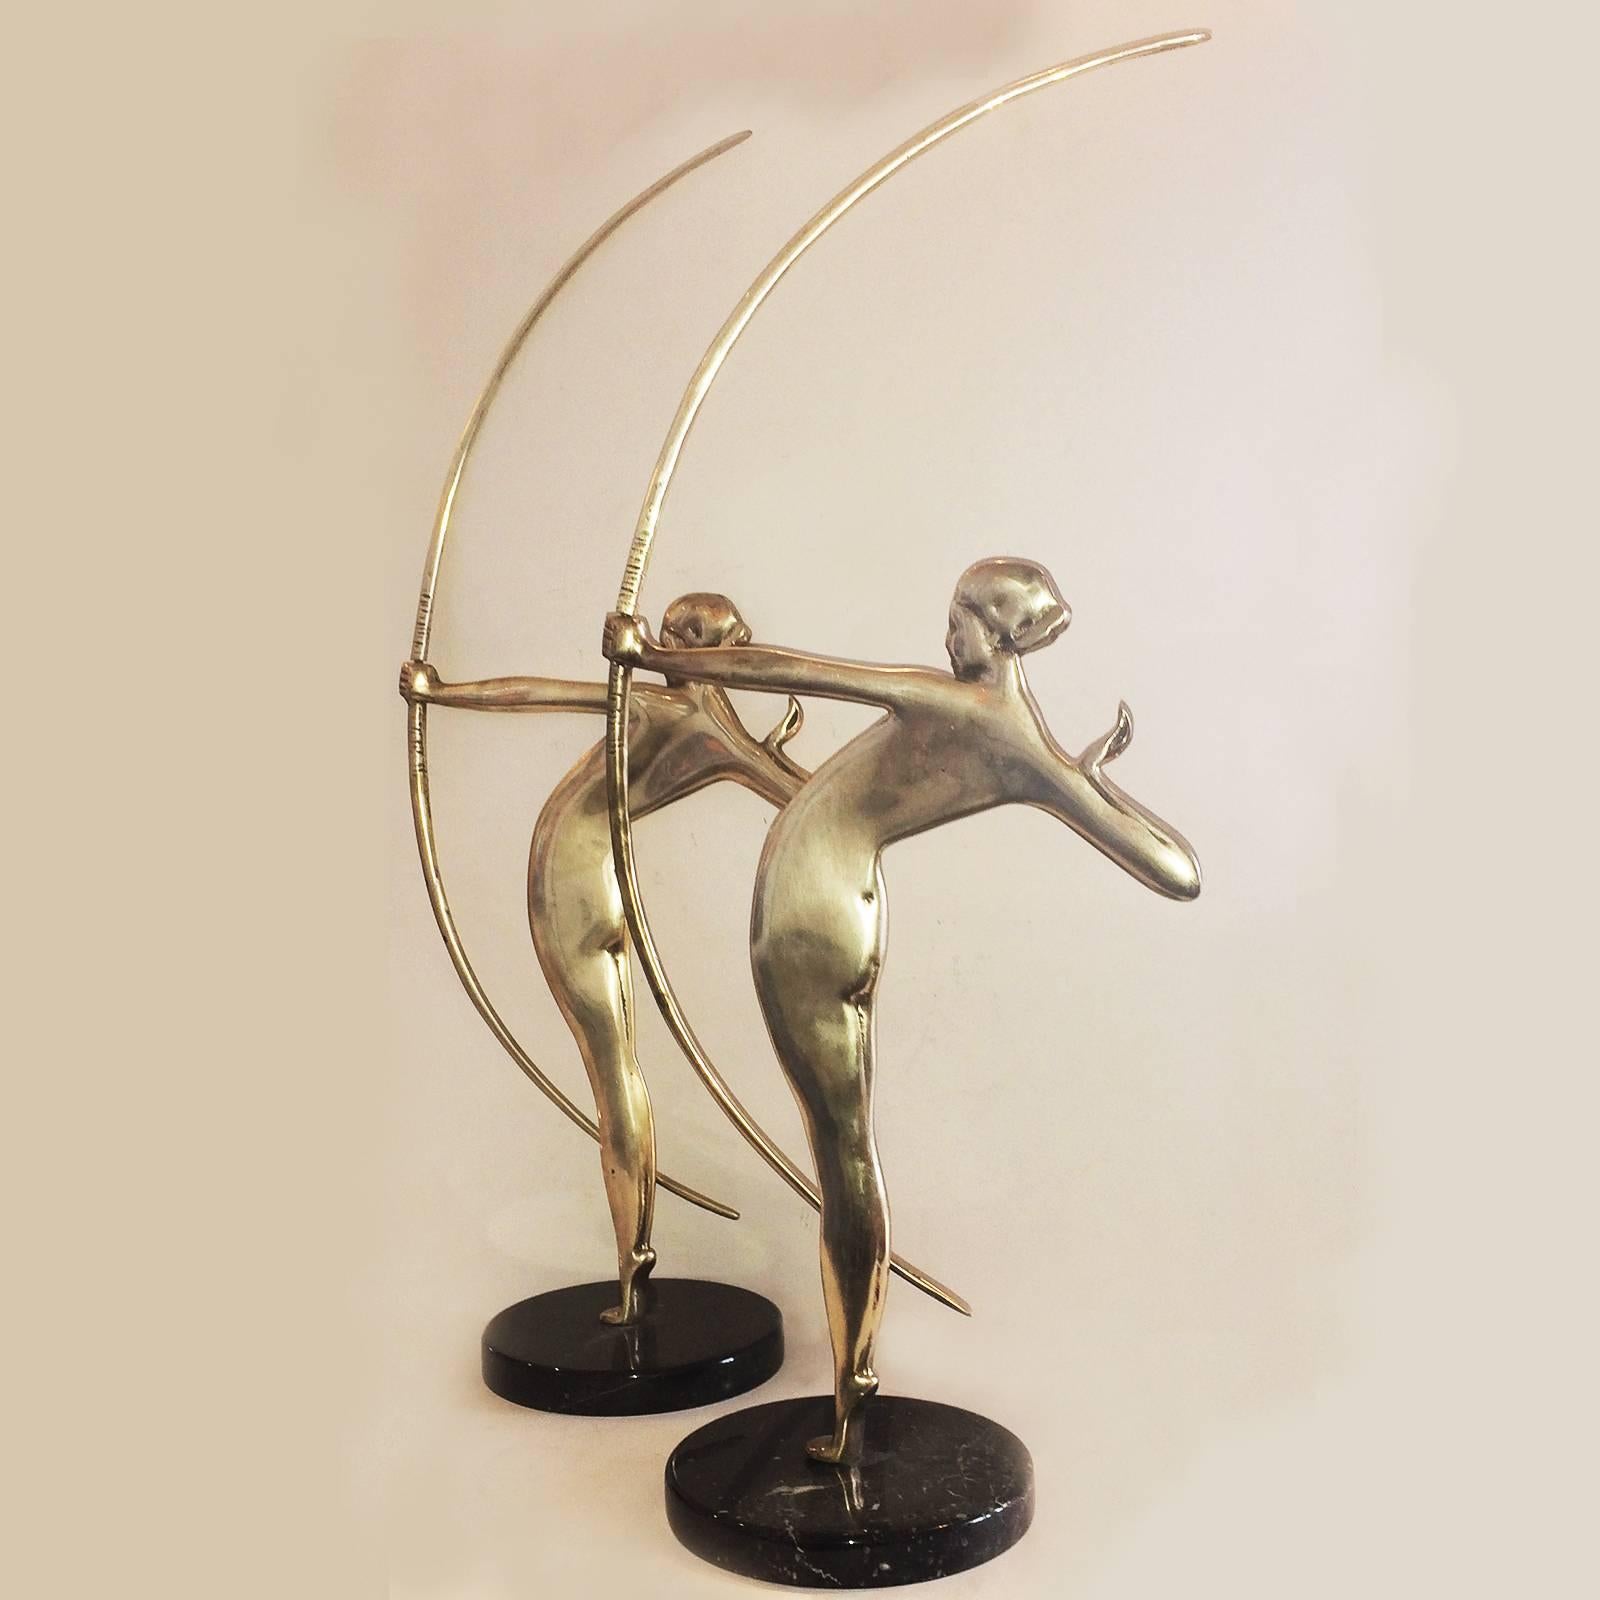 Art Deco, rare pair of large archer figurines, both in excellent original condition, silver-plate on bronze, mounted on white veined, black marble bases, with a soft, aged patina. Dimensions are approximate marble bases are 14.5 cm dia. x 2.2 cm